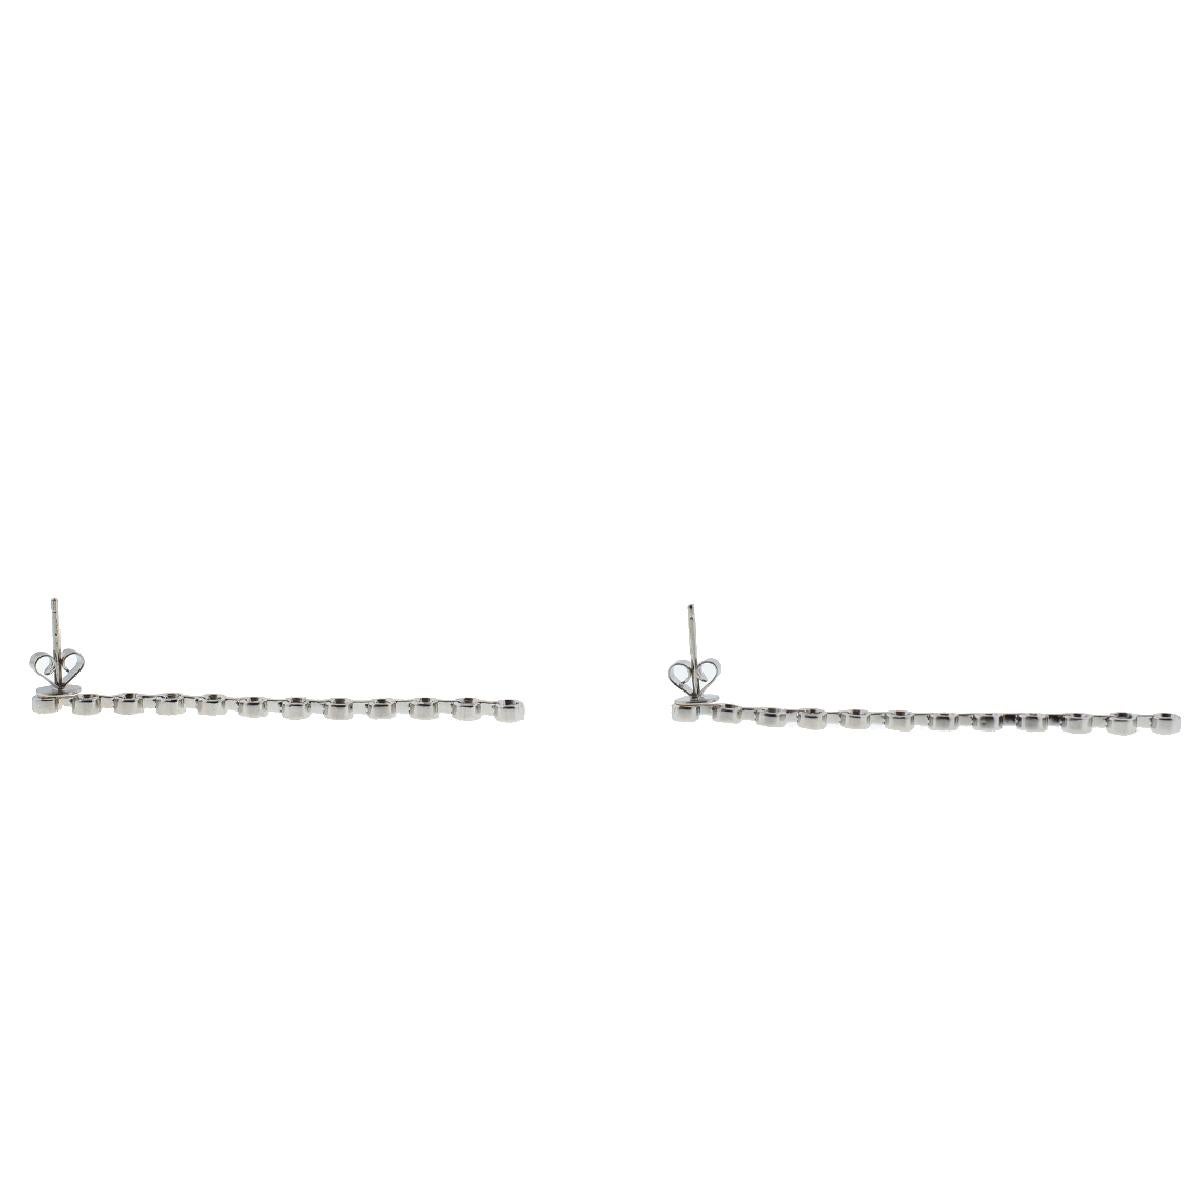 Company-N/A
Style-Drop Diamond Earrings
Metal-18k White Gold
Stones-Diamonds (Approx 1.2 cts)
Weight-6.2 G
Length-2.3
Includes-Earrings only
Sku 8682-1UEE